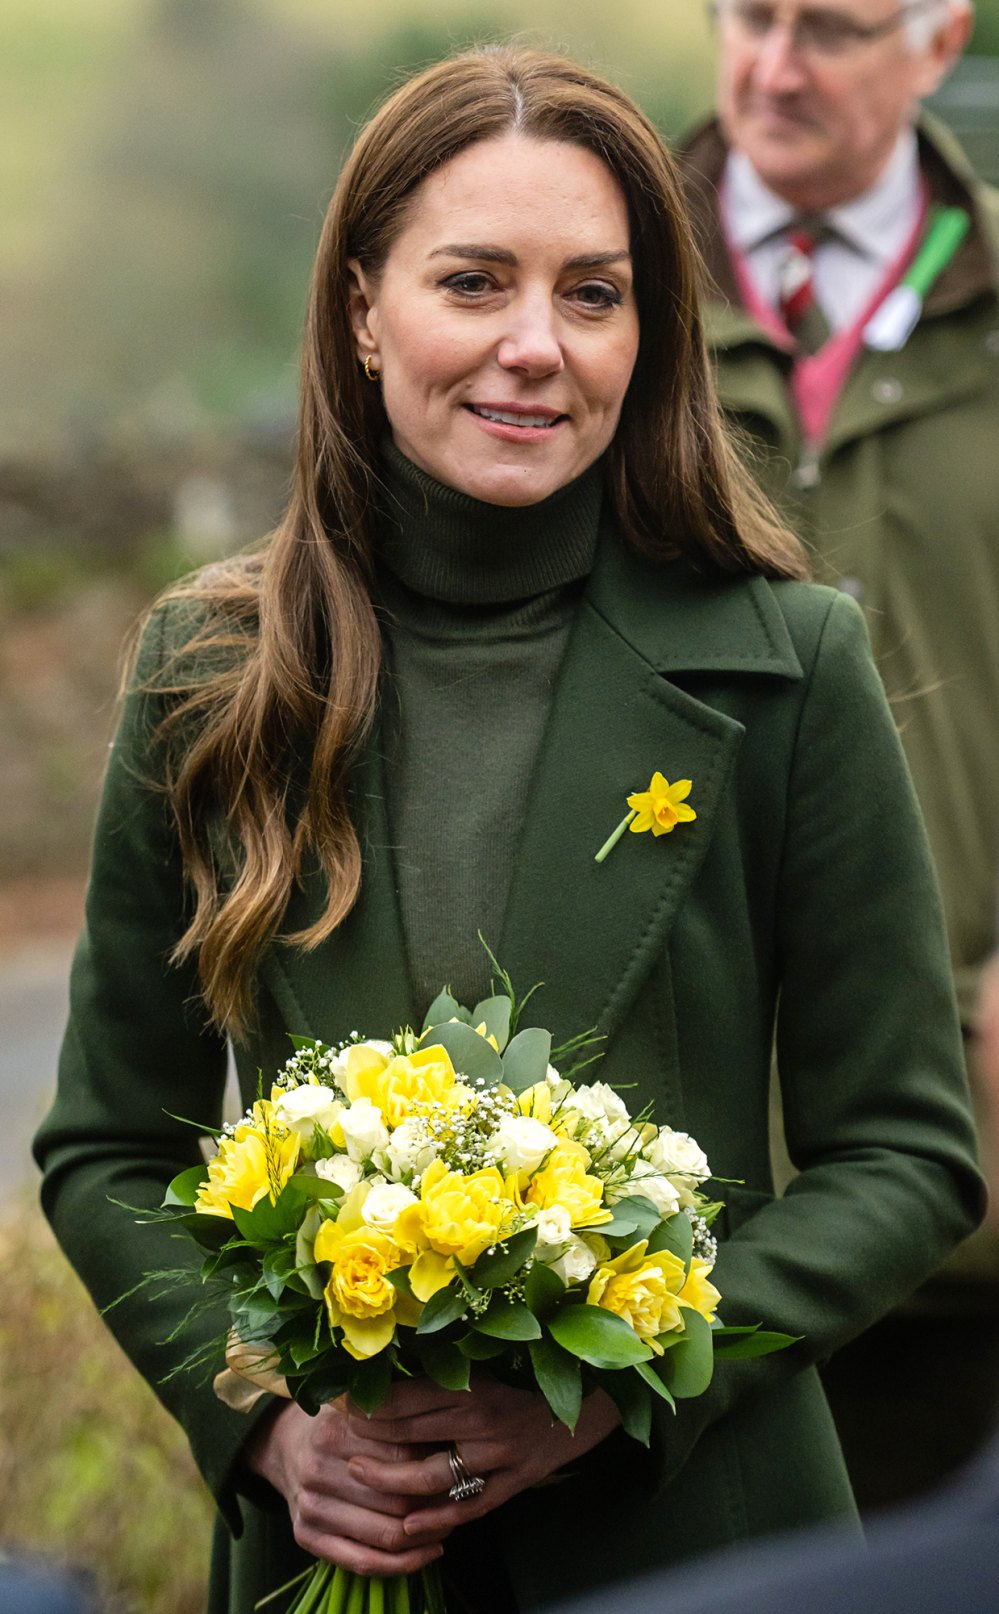 Kate Middleton Sat in Front of Daffodils in Cancer Announcement Seemingly Because of Its Symbolism